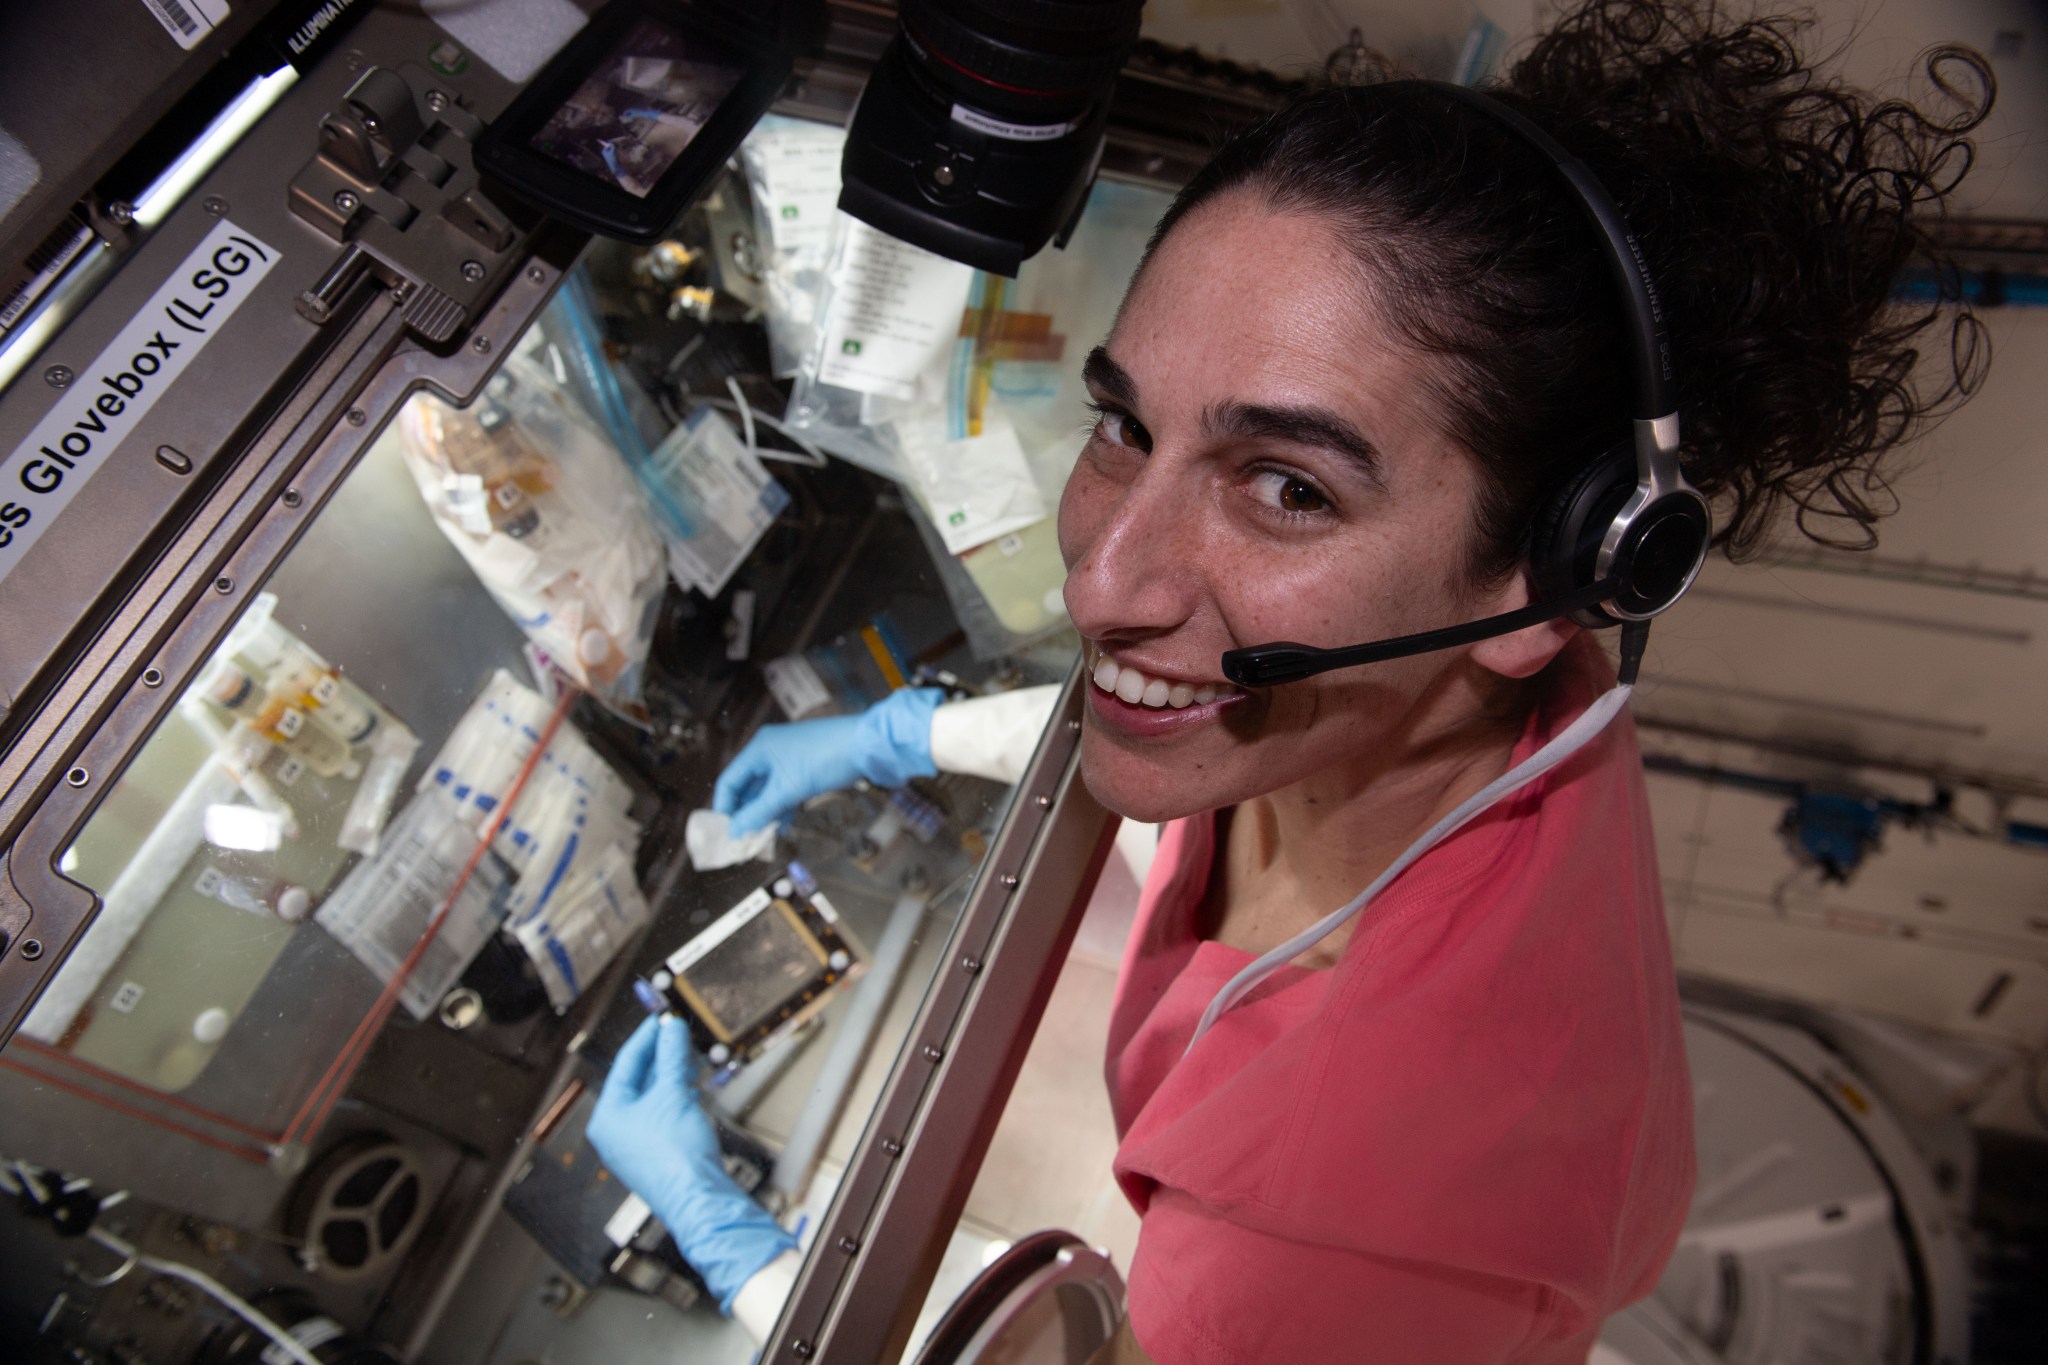 NASA astronaut and Expedition 70 Flght Engineer Jasmin Moghbeli works inside the Life Science Glovebox for the Microgravity Associated Bone Loss-A investigation. She was processing bone cell samples obtained from human donors on Earth and exploring space-caused bone loss. Results may help doctors learn how to protect and treat astronauts on long-term missions and inform treatments for bone conditions on Earth.